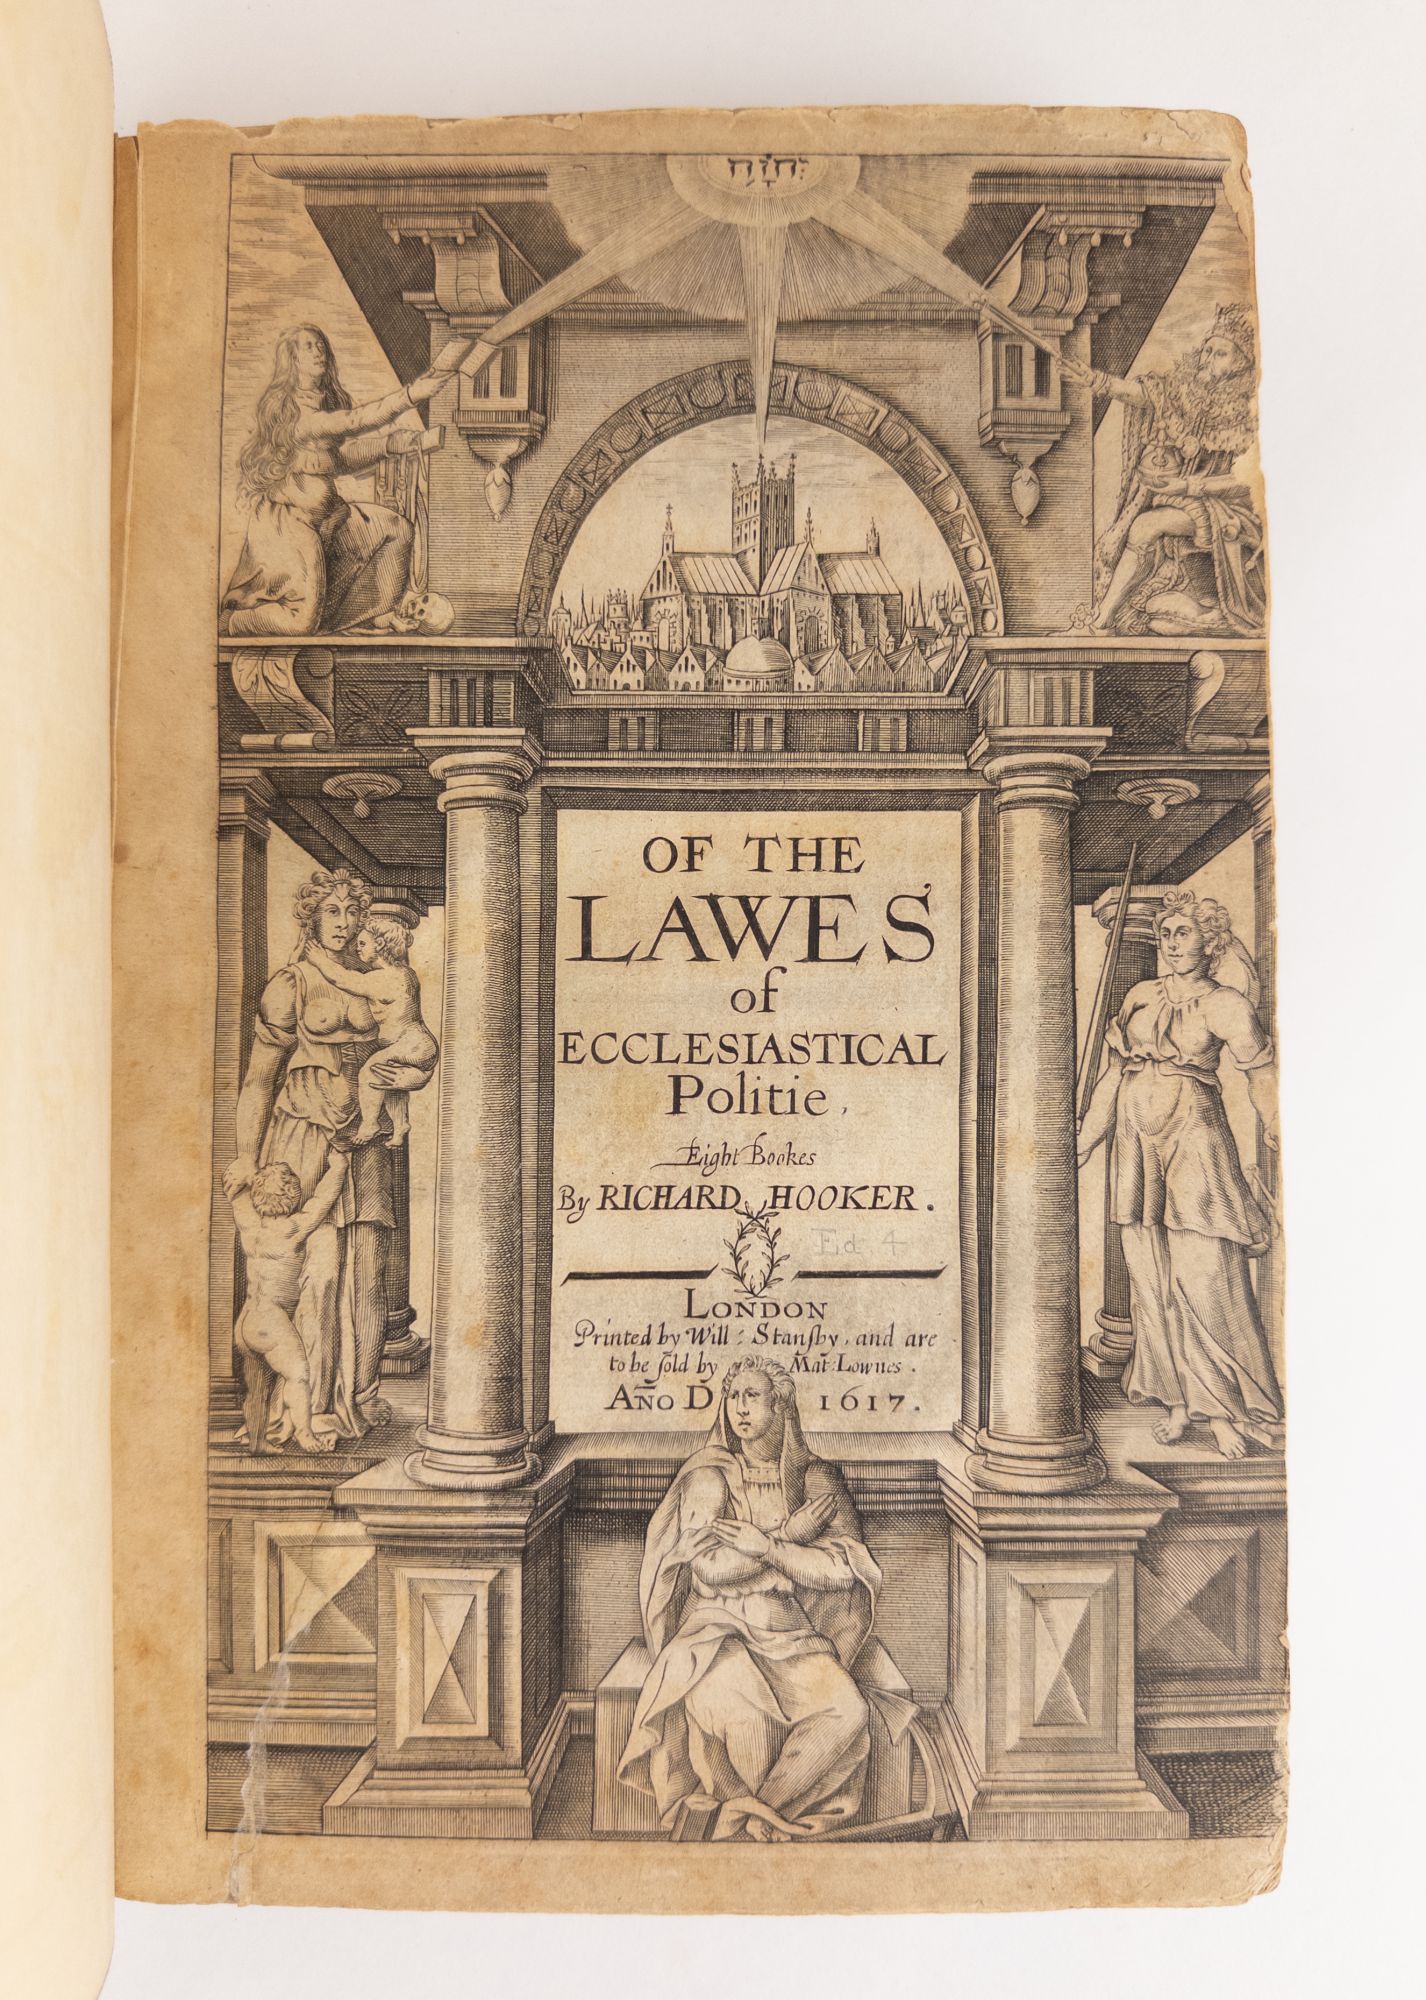 Product Image for OF THE LAWES OF ECCLESIASTICAL POLITIE